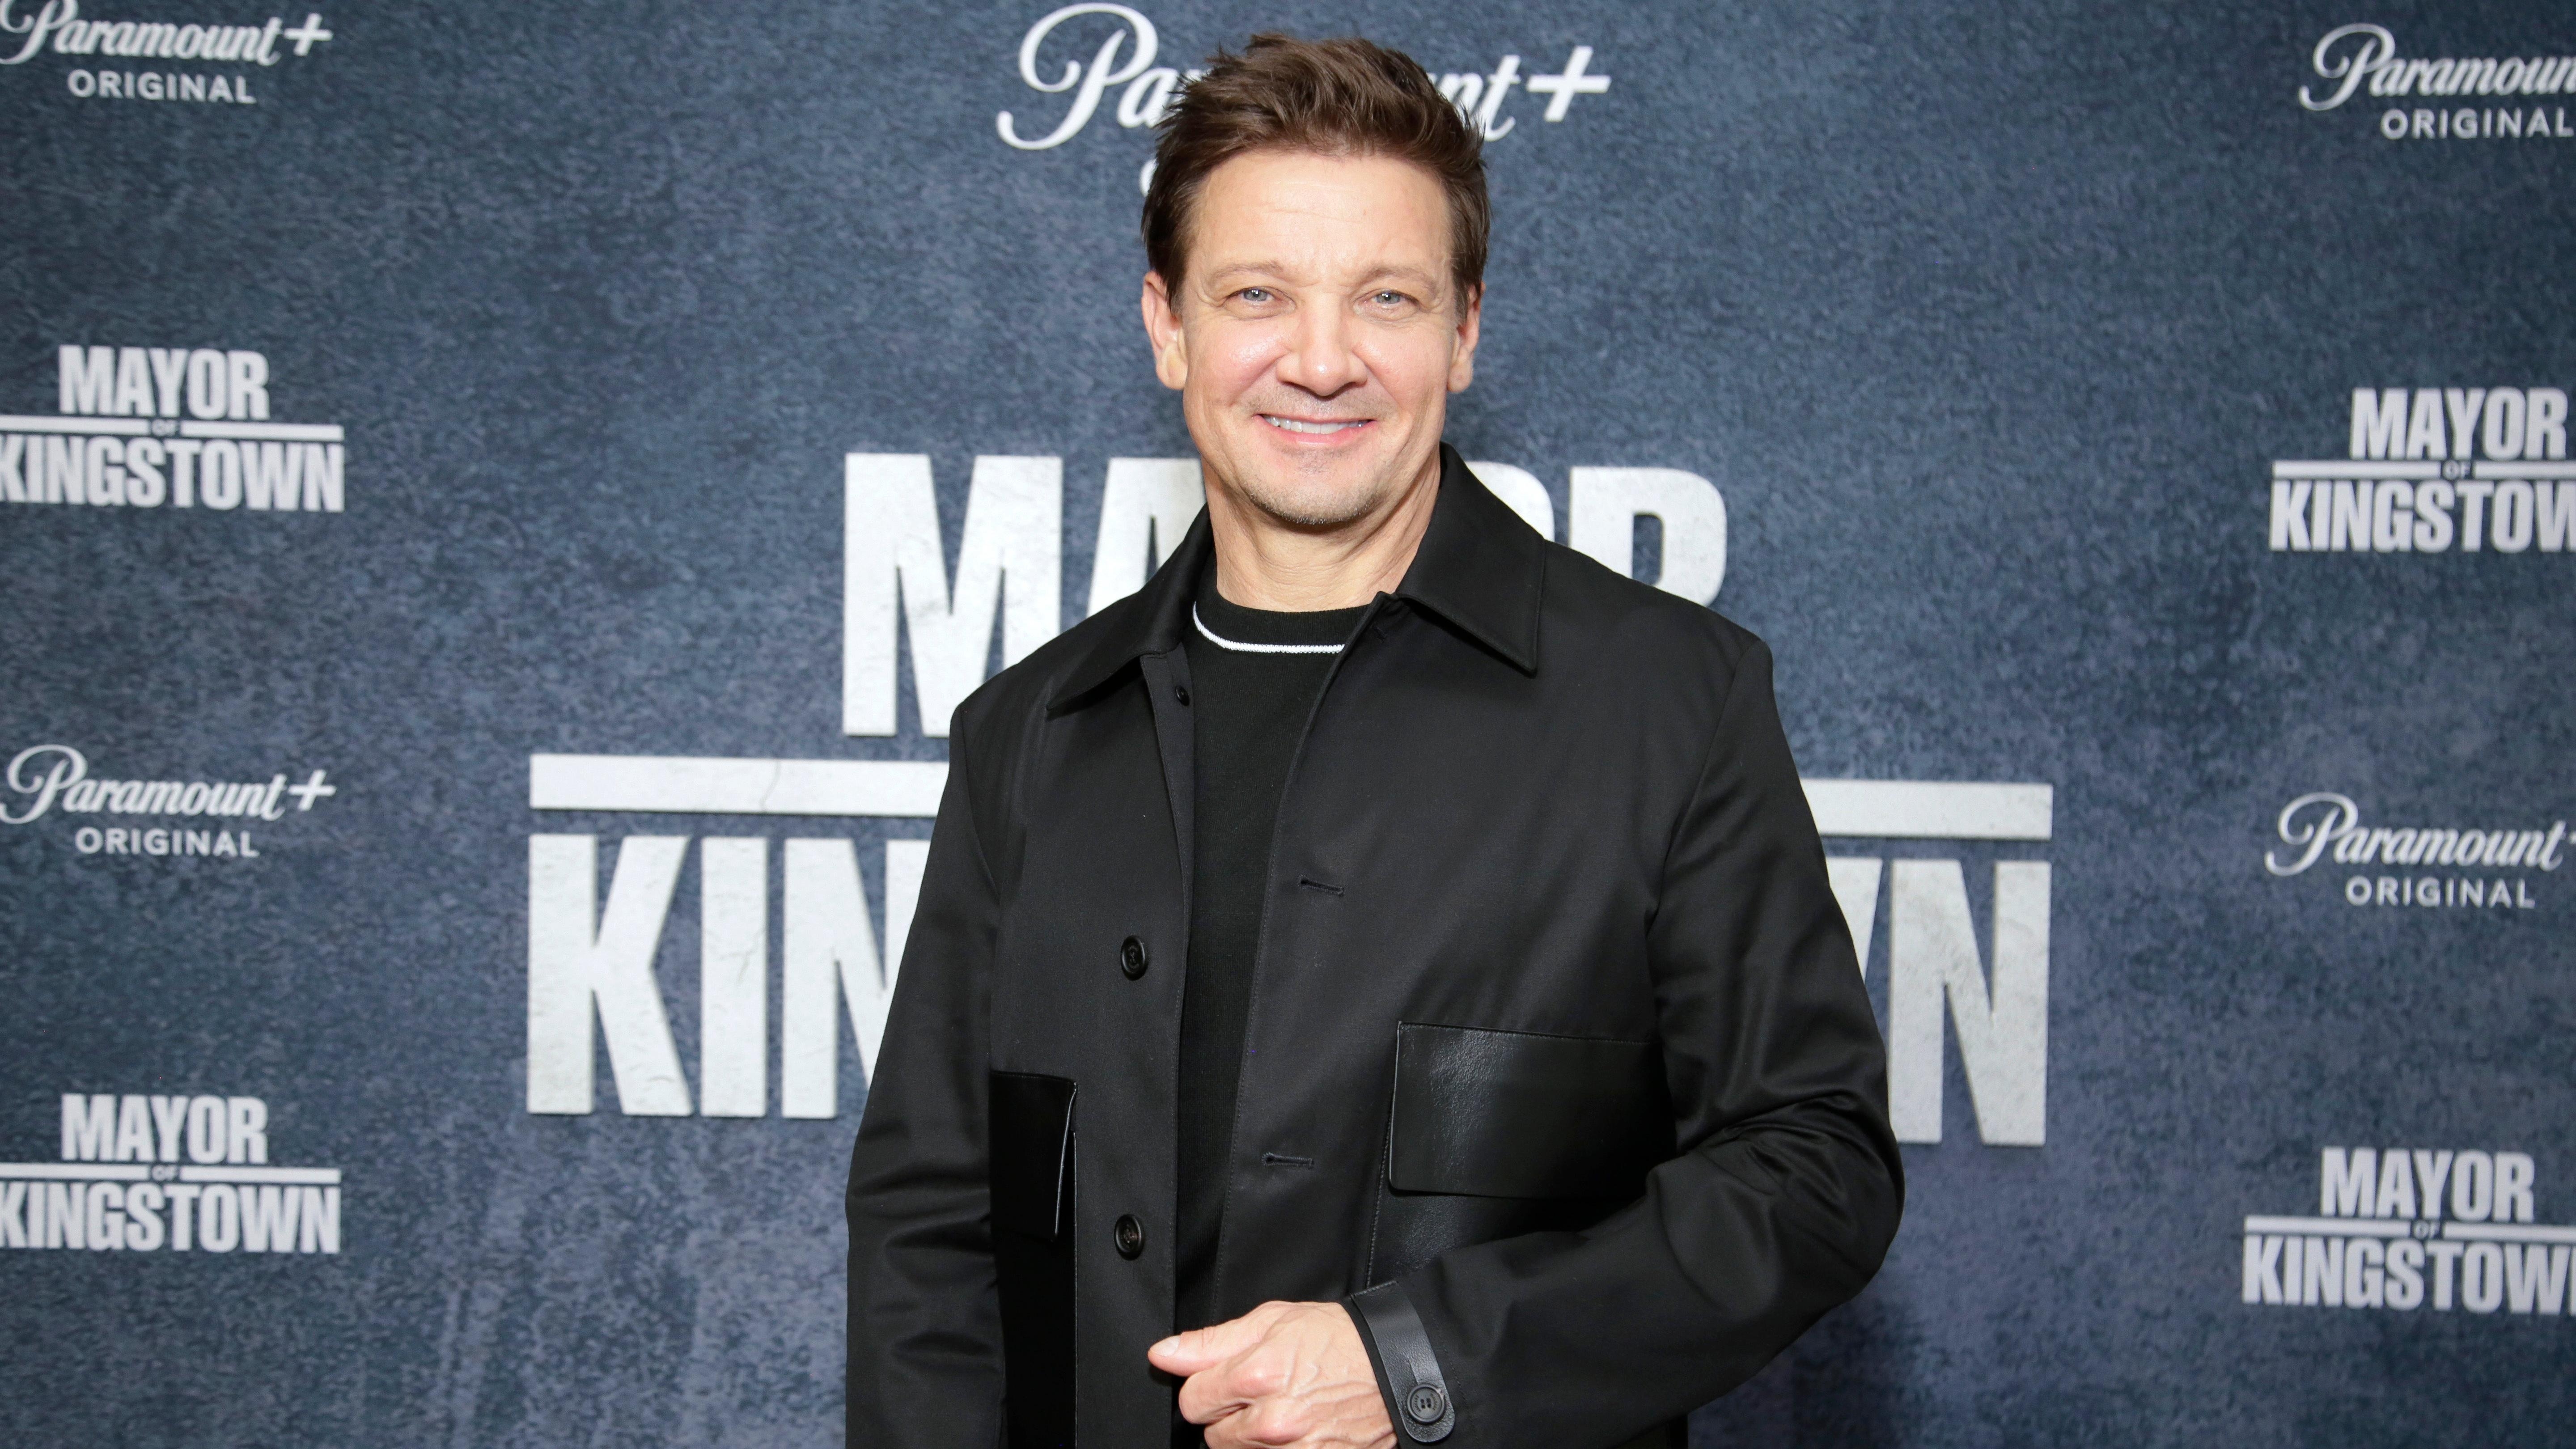 Jeremy Renner is too busy healing in reality to play make-believe